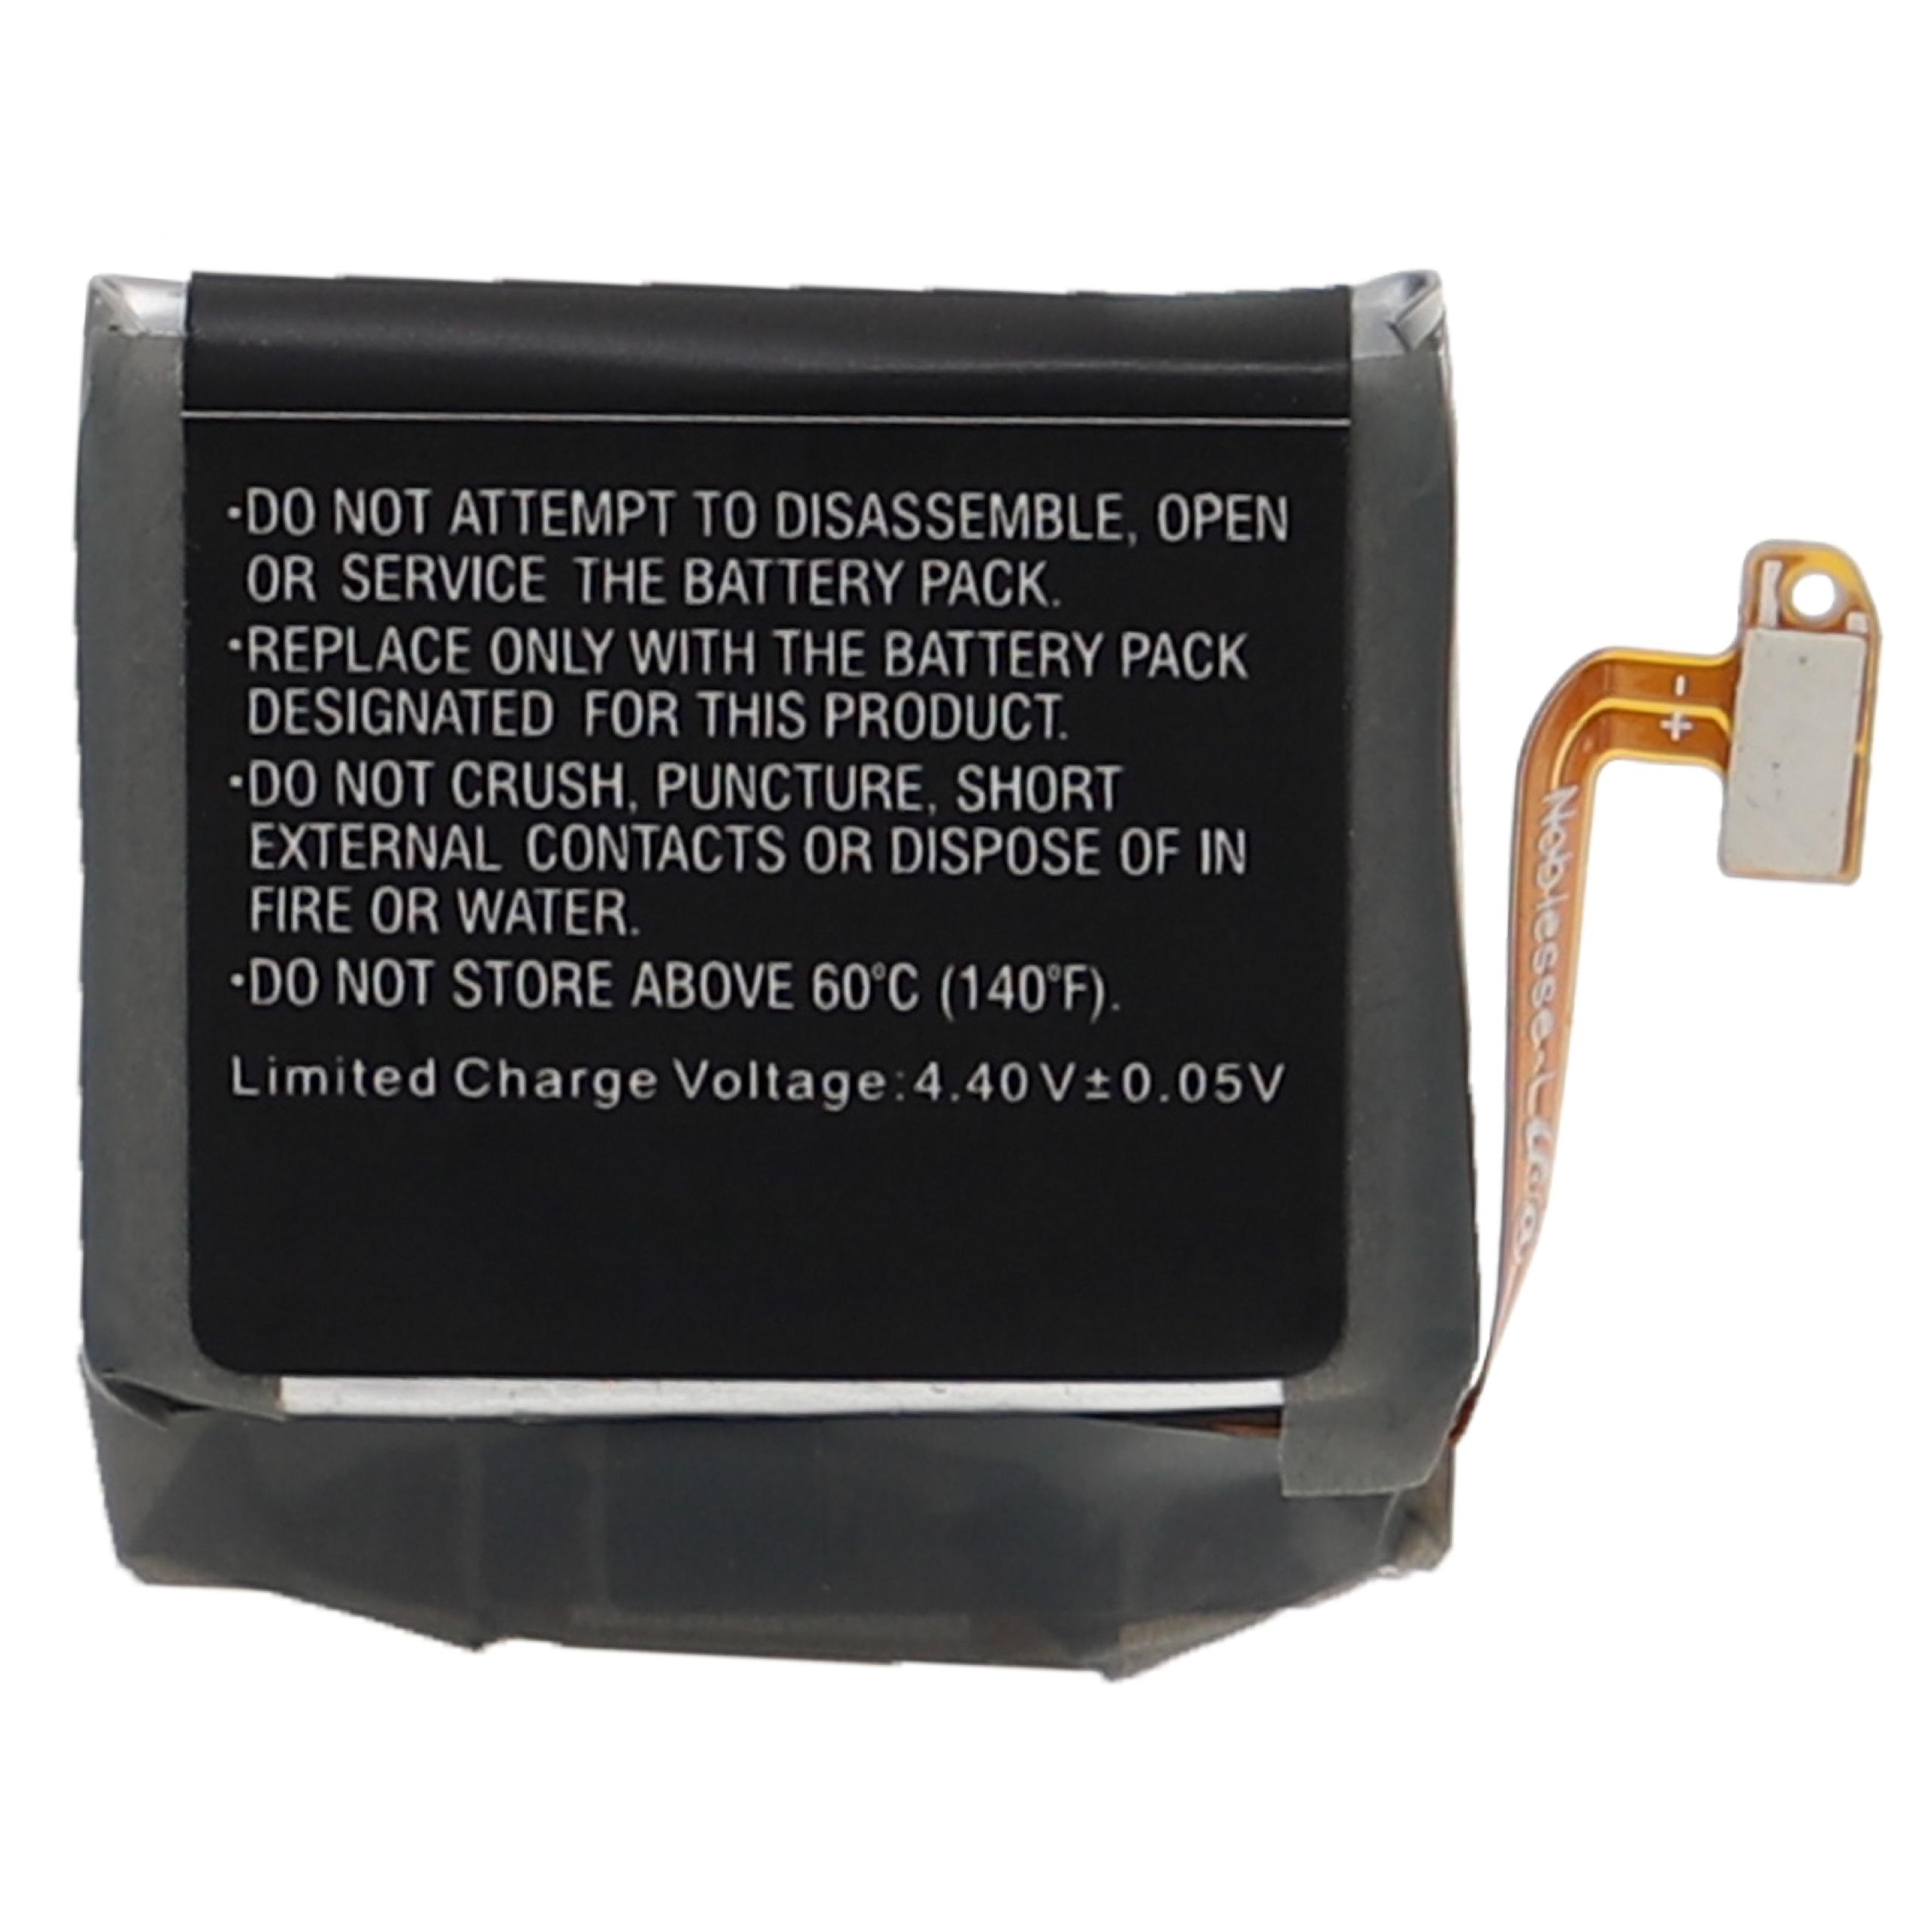 Smartwatch Battery Replacement for Samsung EB-BR840ABY, GH43-05011A - 330mAh 3.85V Li-polymer